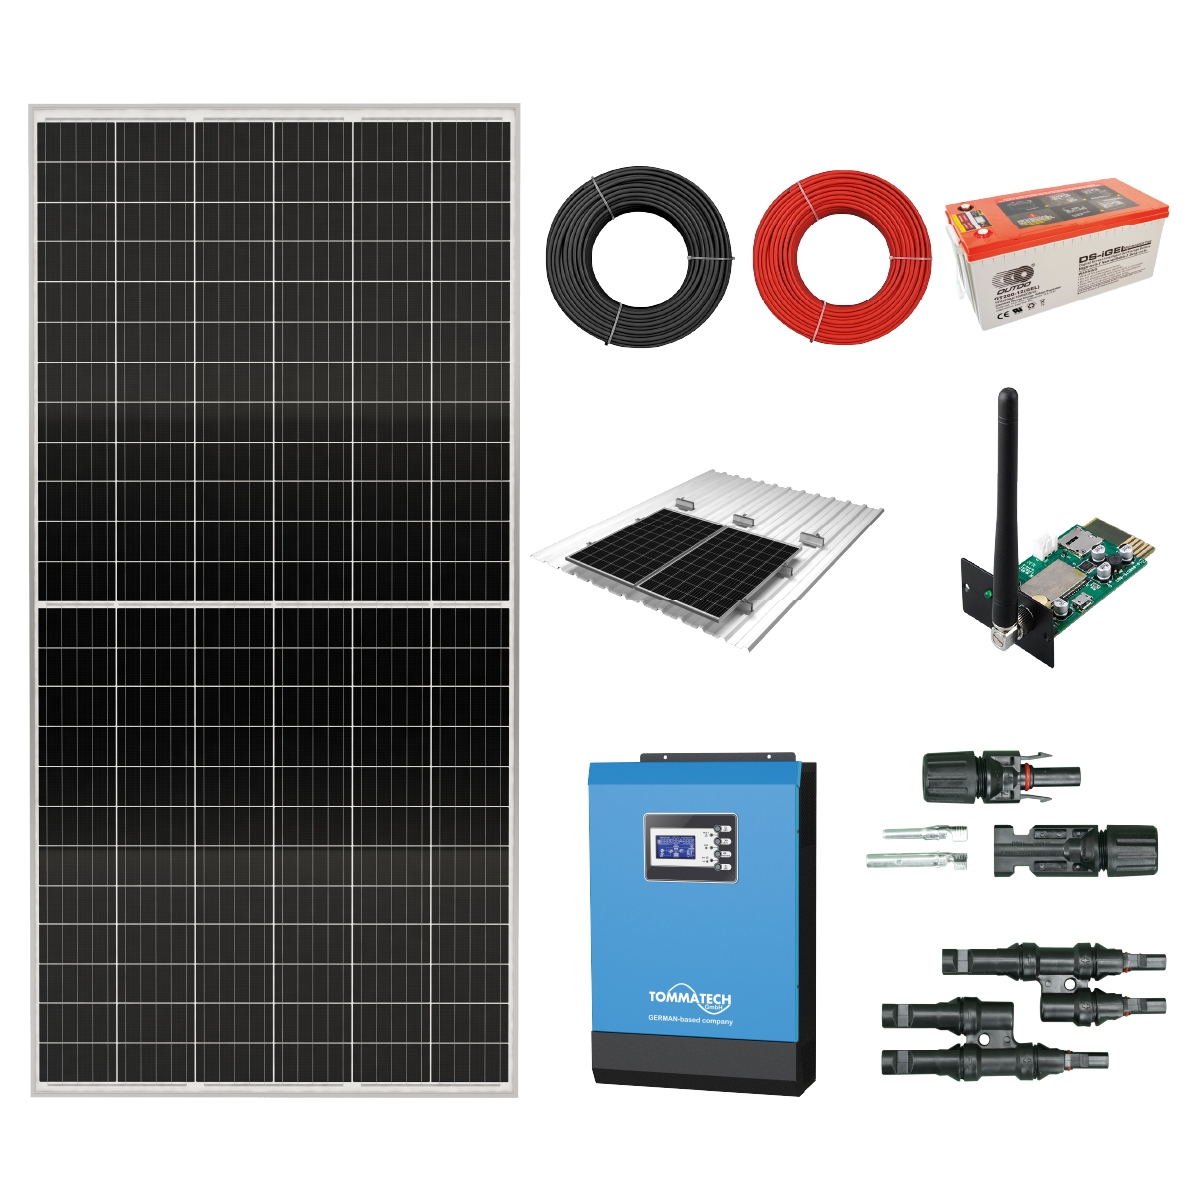 5kW / 2.73kWp / 19.2kWh / 1~ MPPT Solar Off-Grid Solution